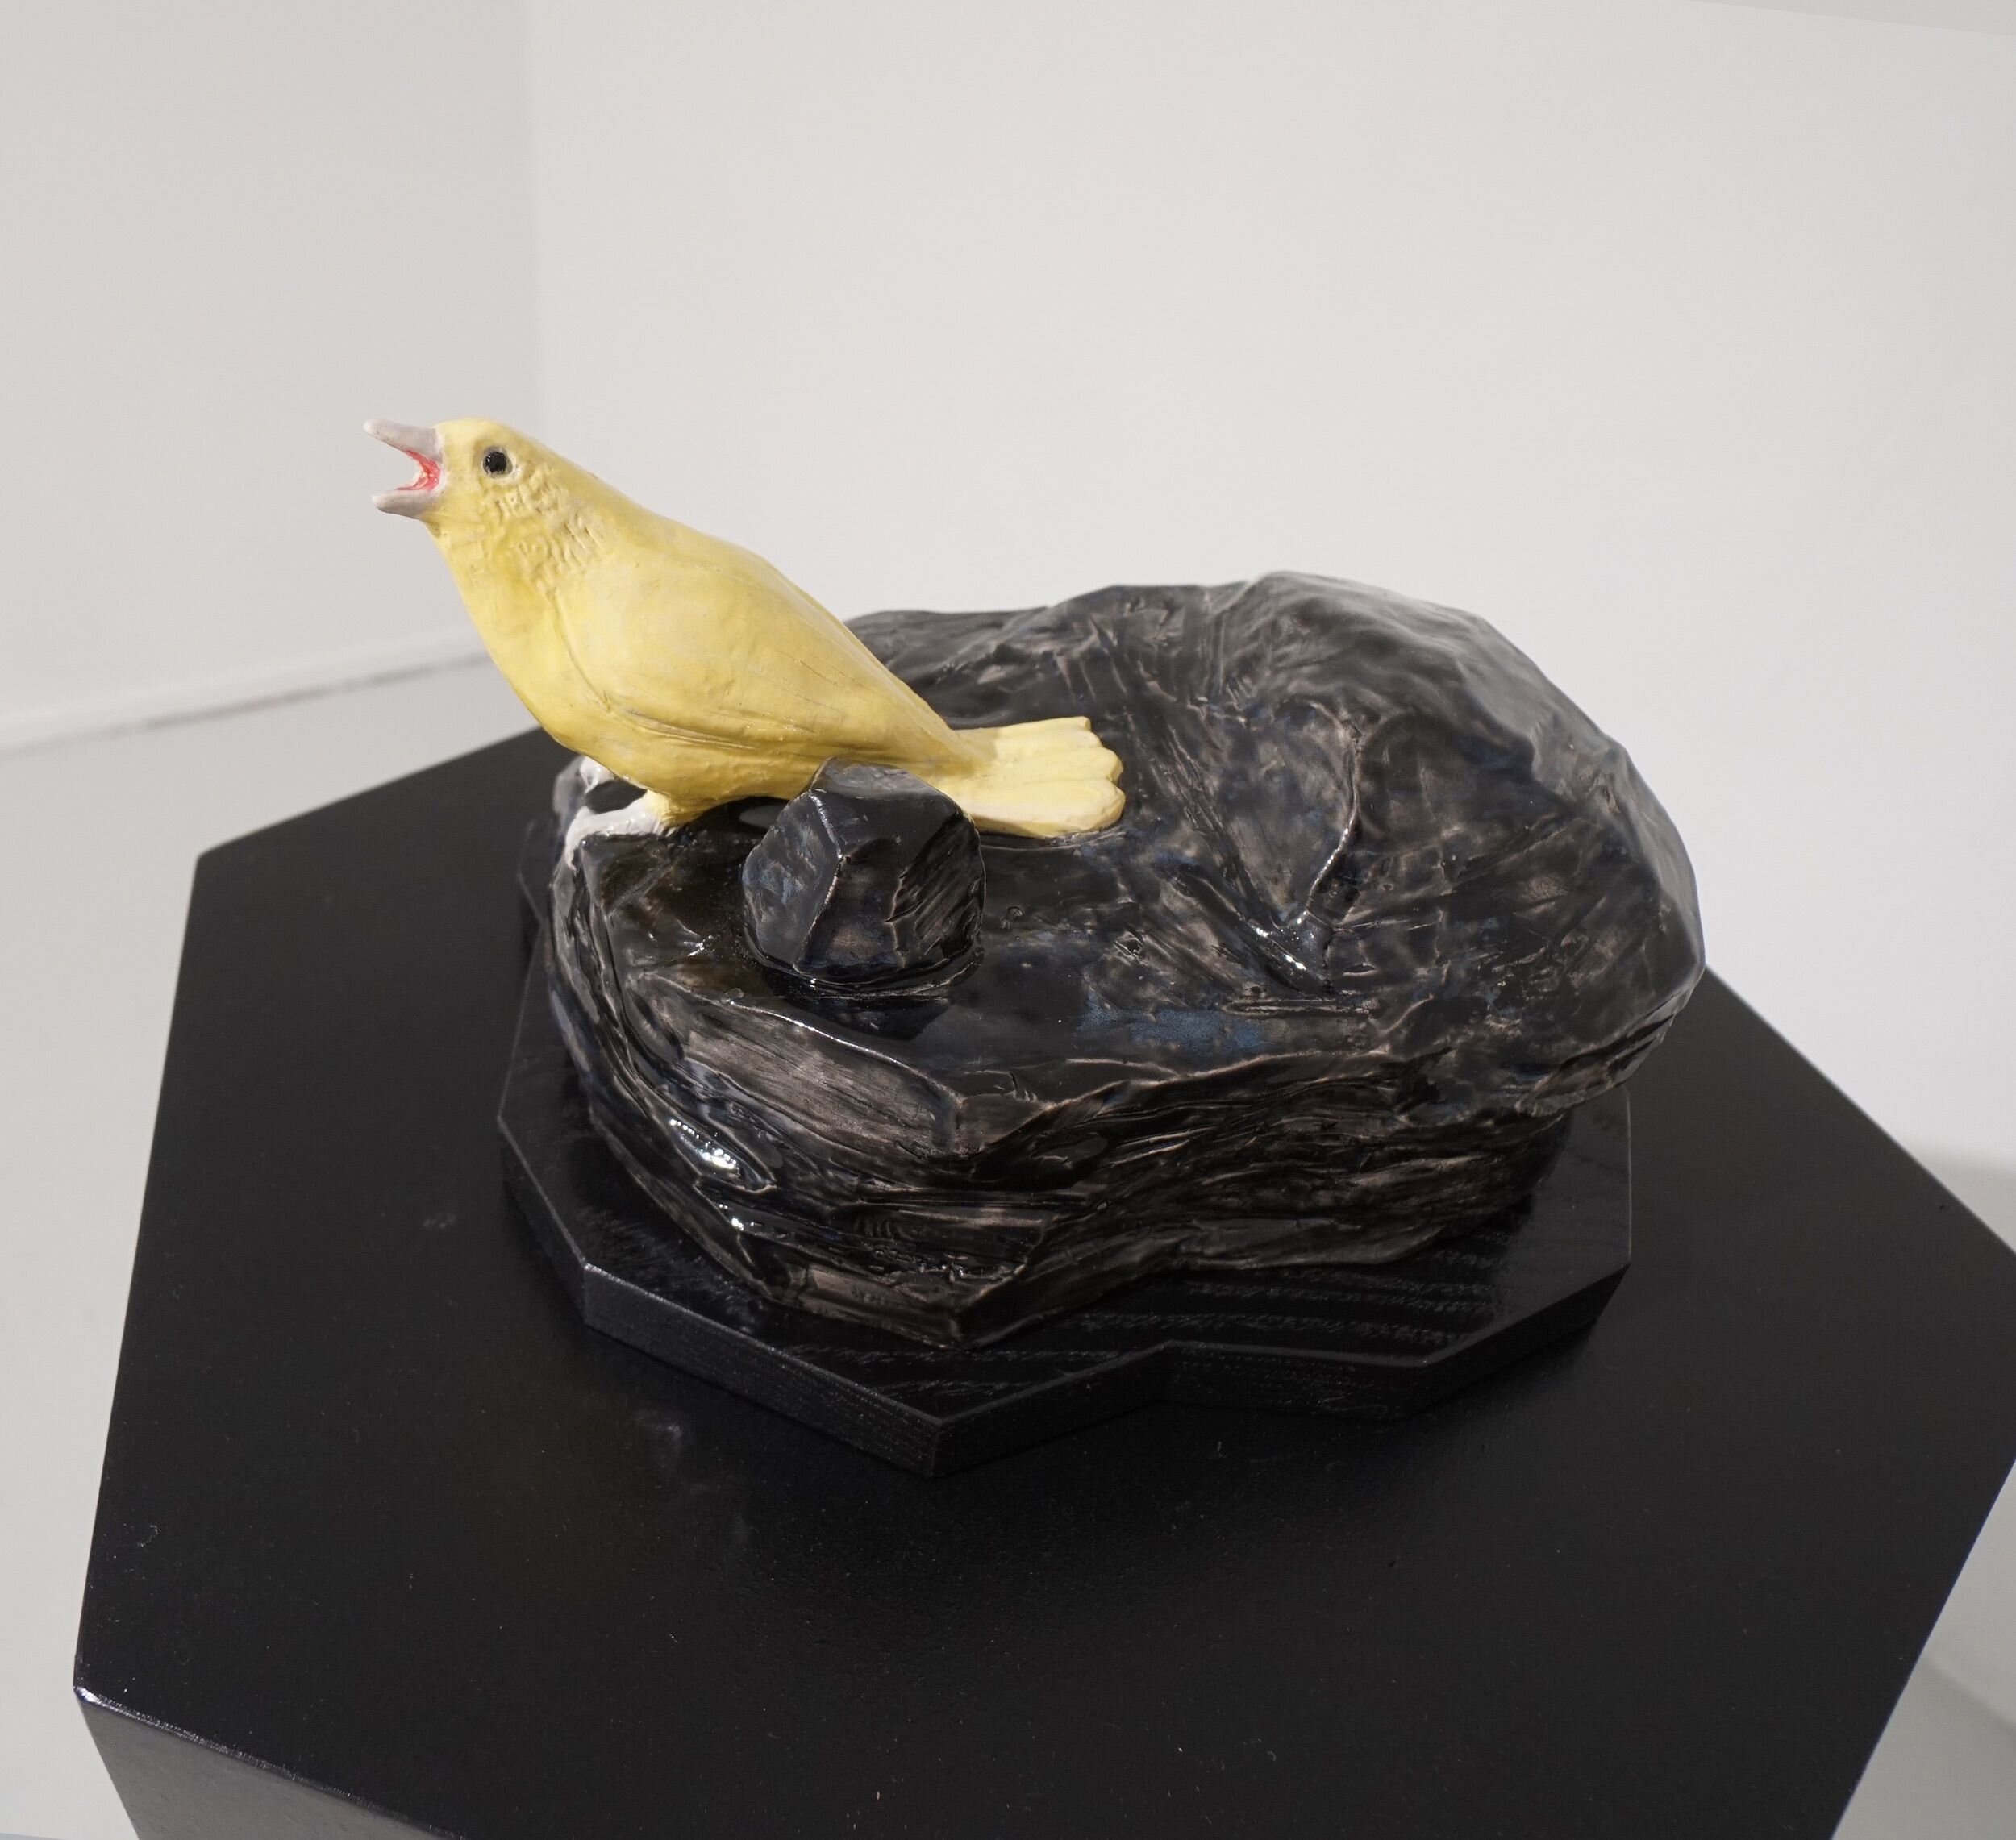  Mindy Rose Schwartz    The Canary , 2020 Fired clay, wood, musical mechanism 6 1/2 x 9 x 7 in 16.5 x 22.9 x 17.8 cm 